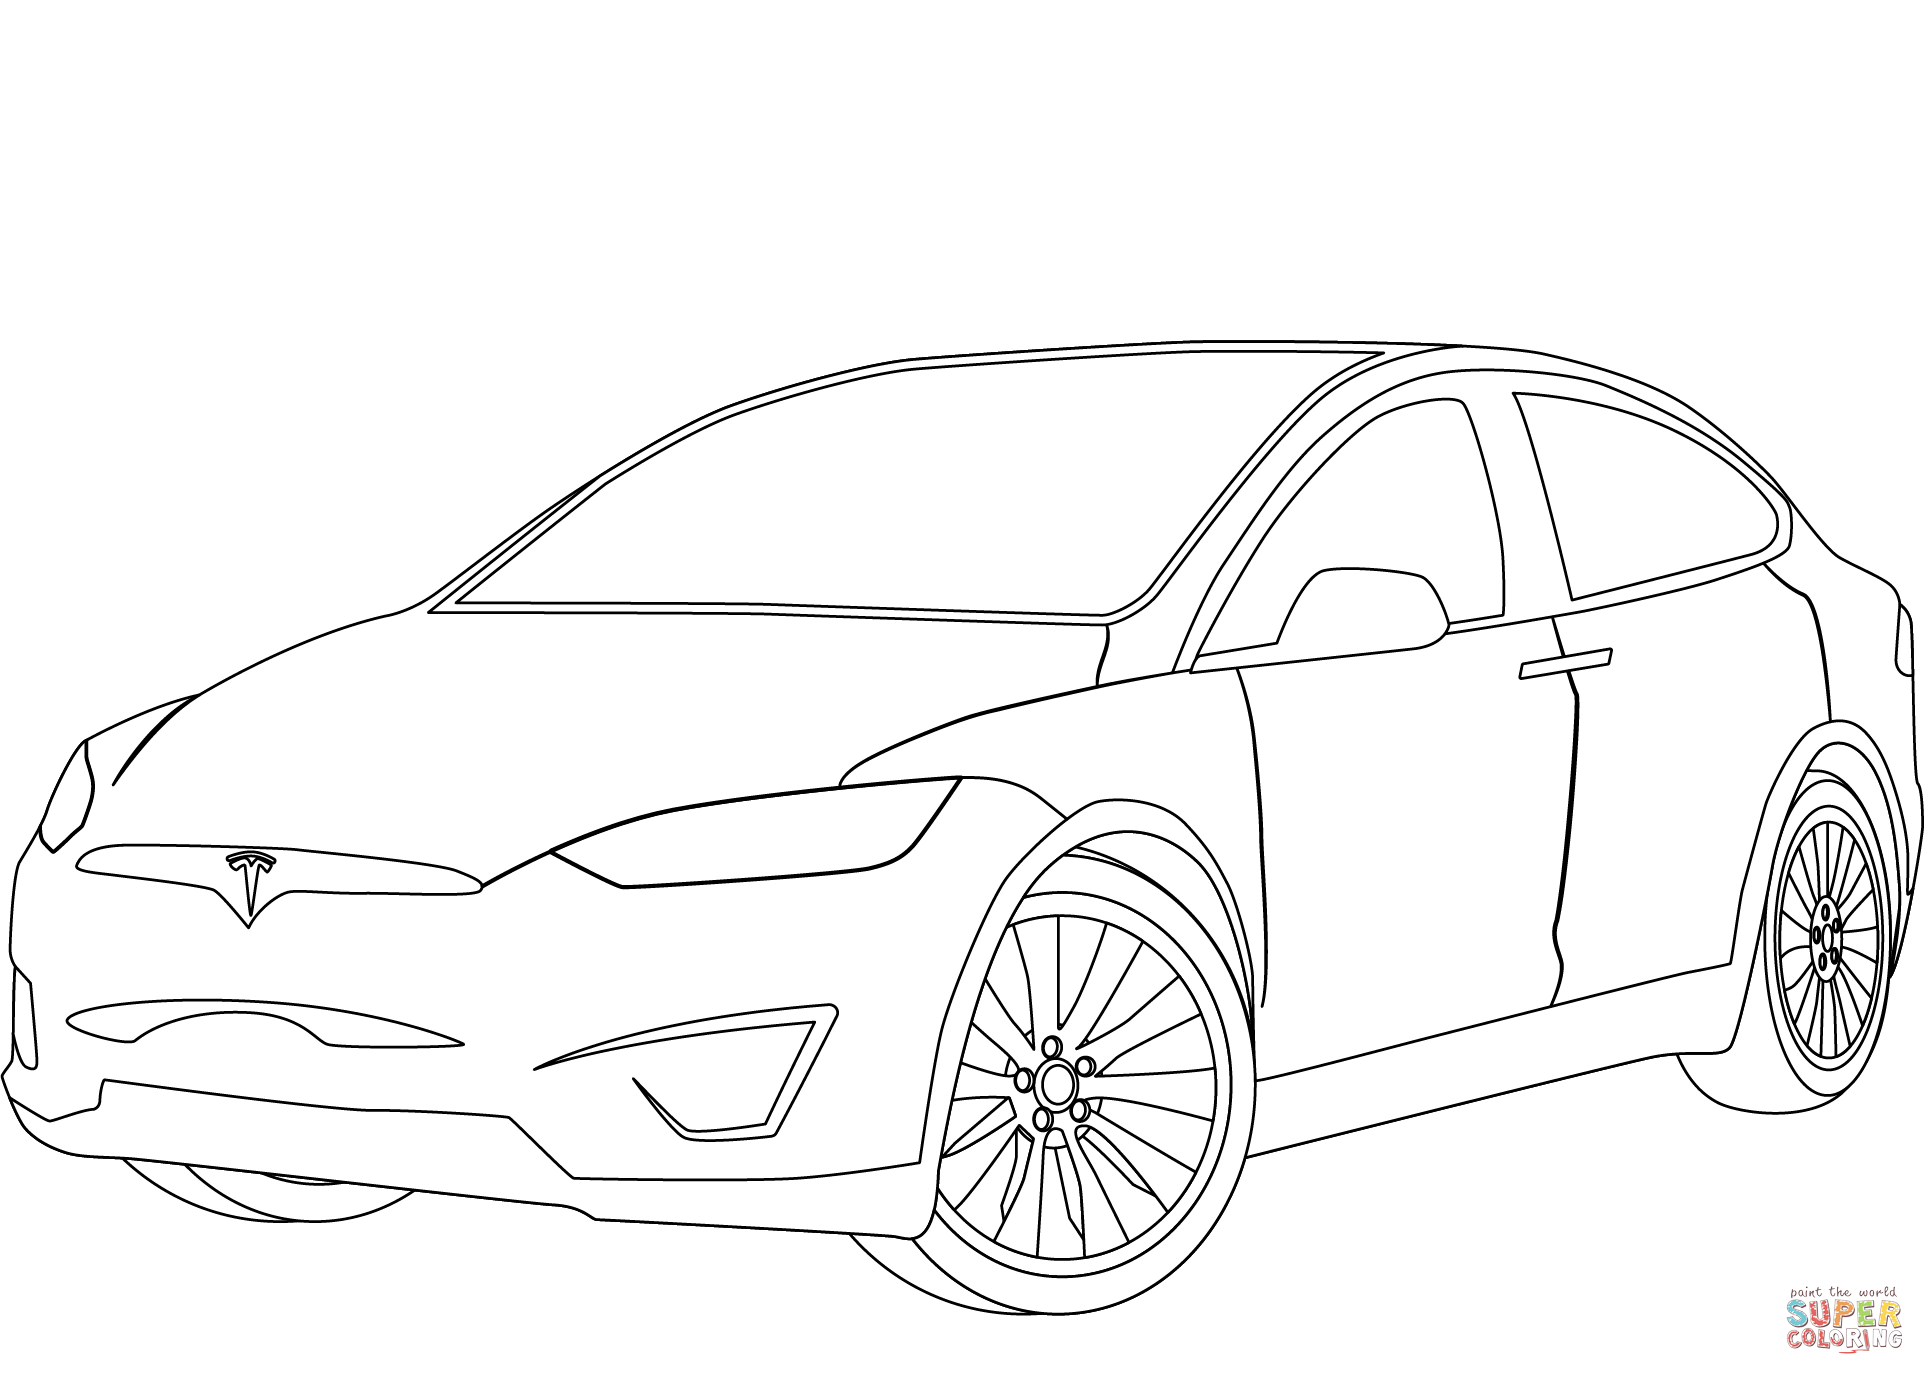 Tesla model x coloring page free printable coloring pages